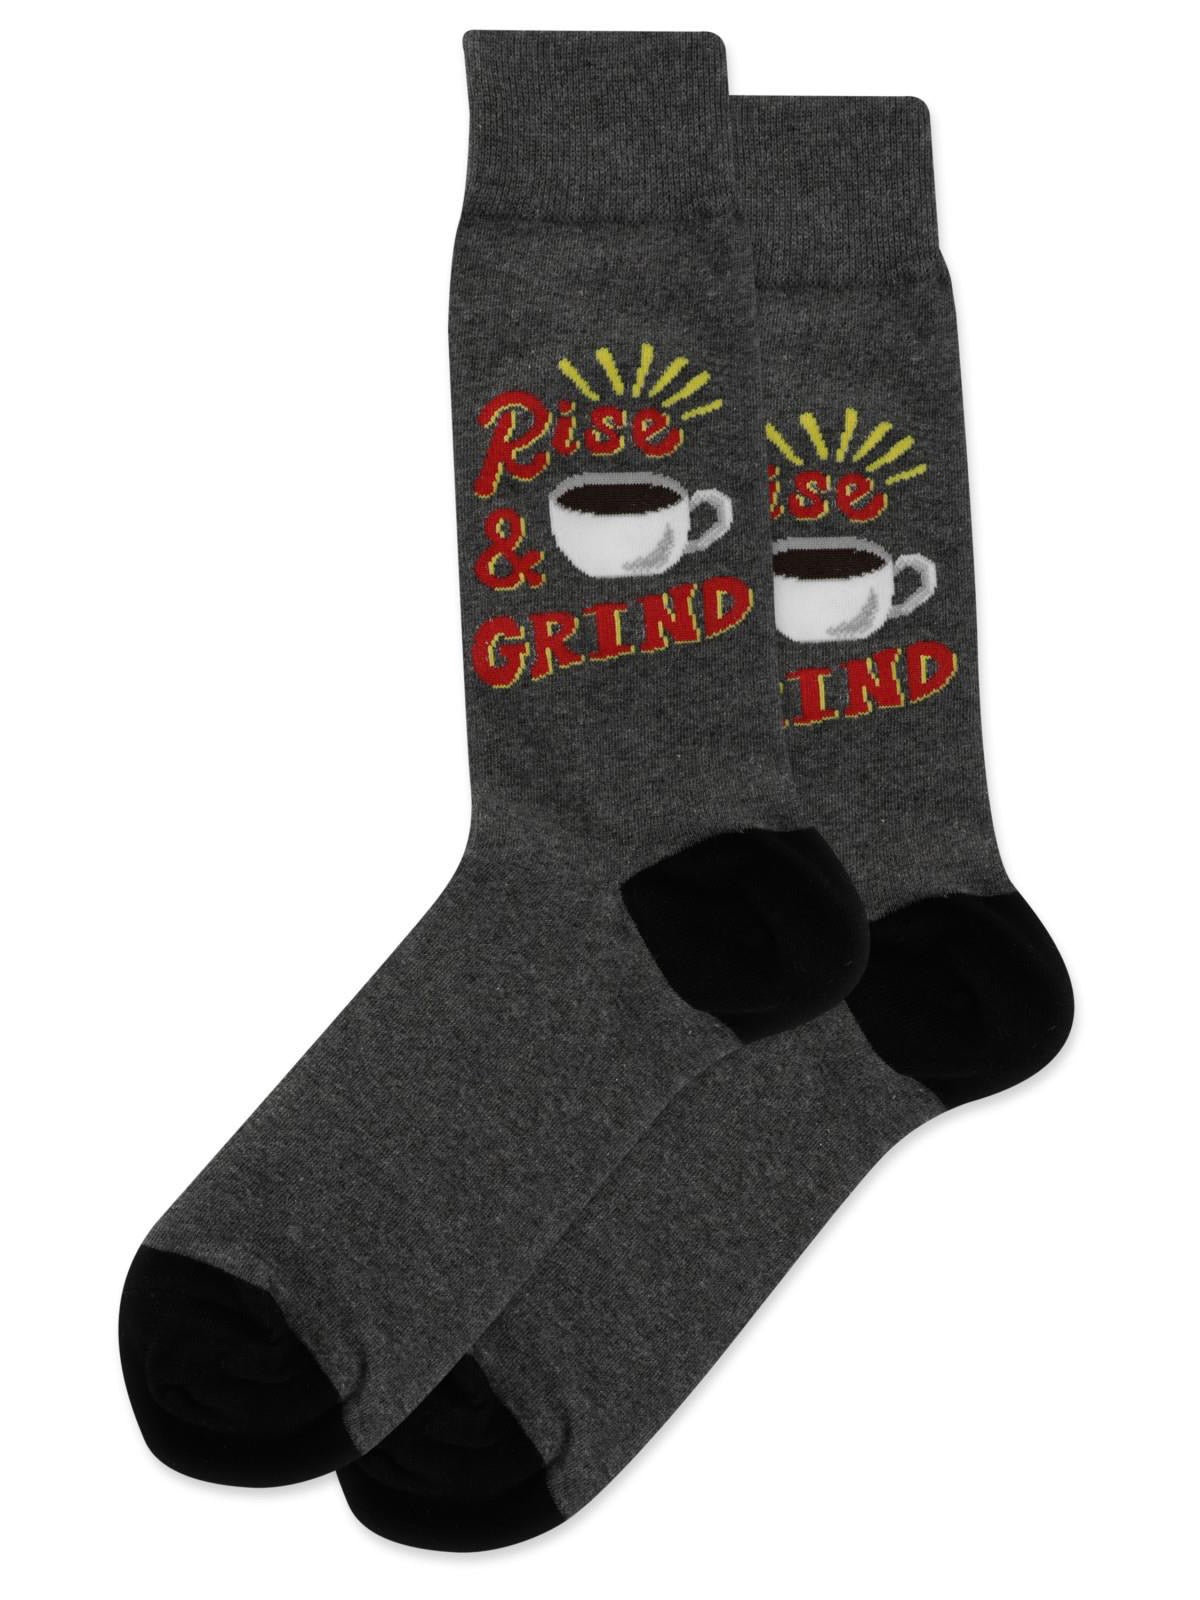 Men’s Rise and Grind Crew Socks Charcoal